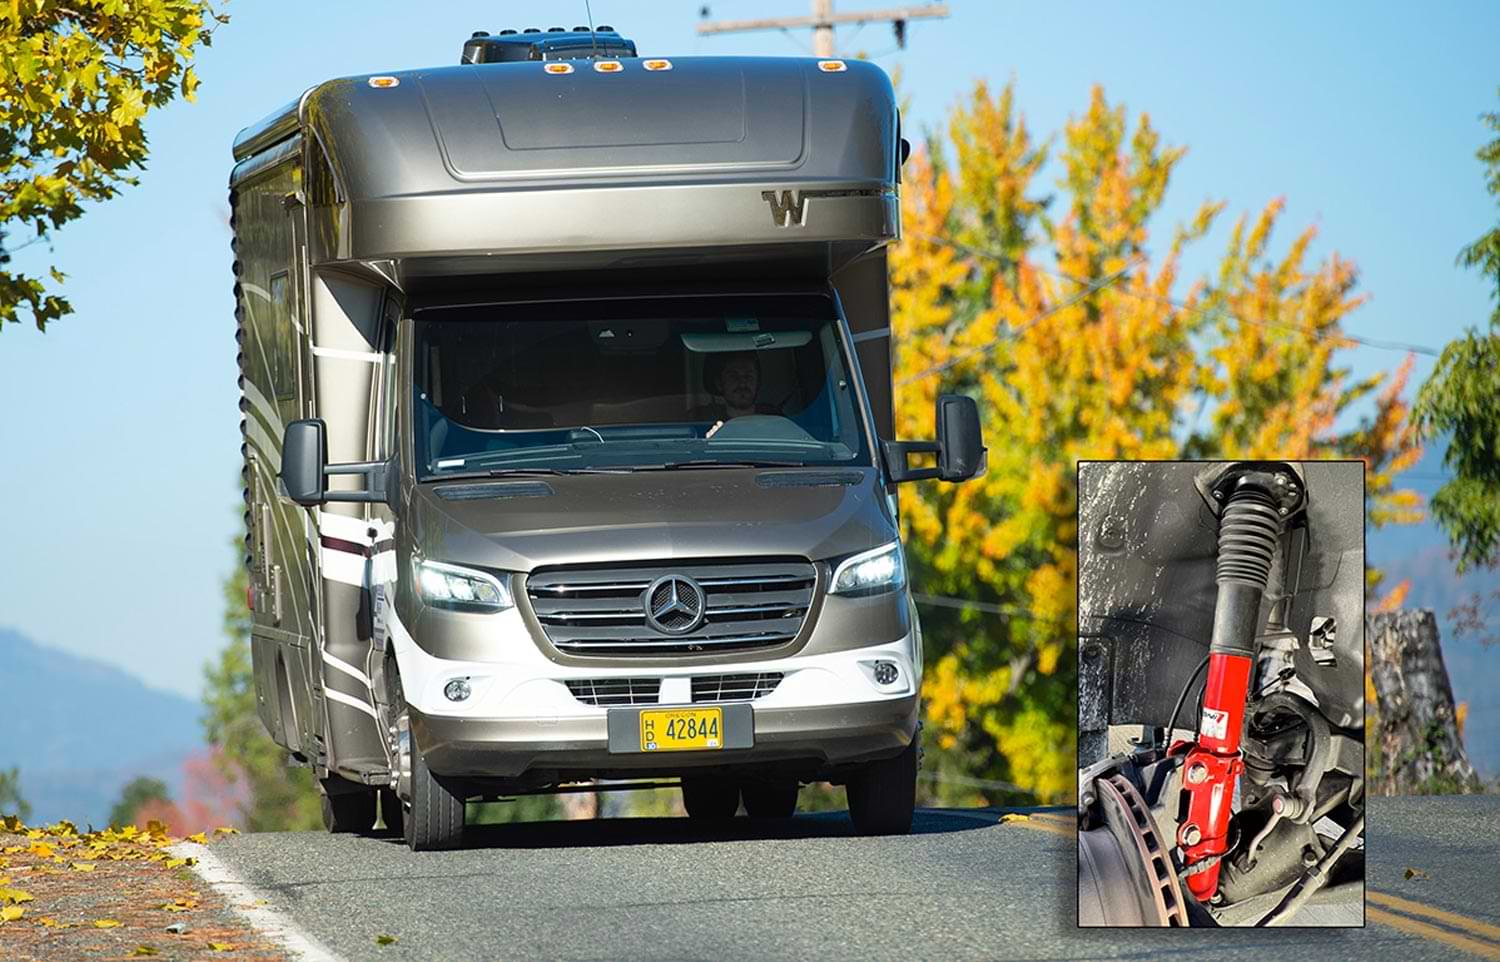 an image of a Mercedes RV riding down a road superimposed with the image of a KONI Red installed on a vehicle